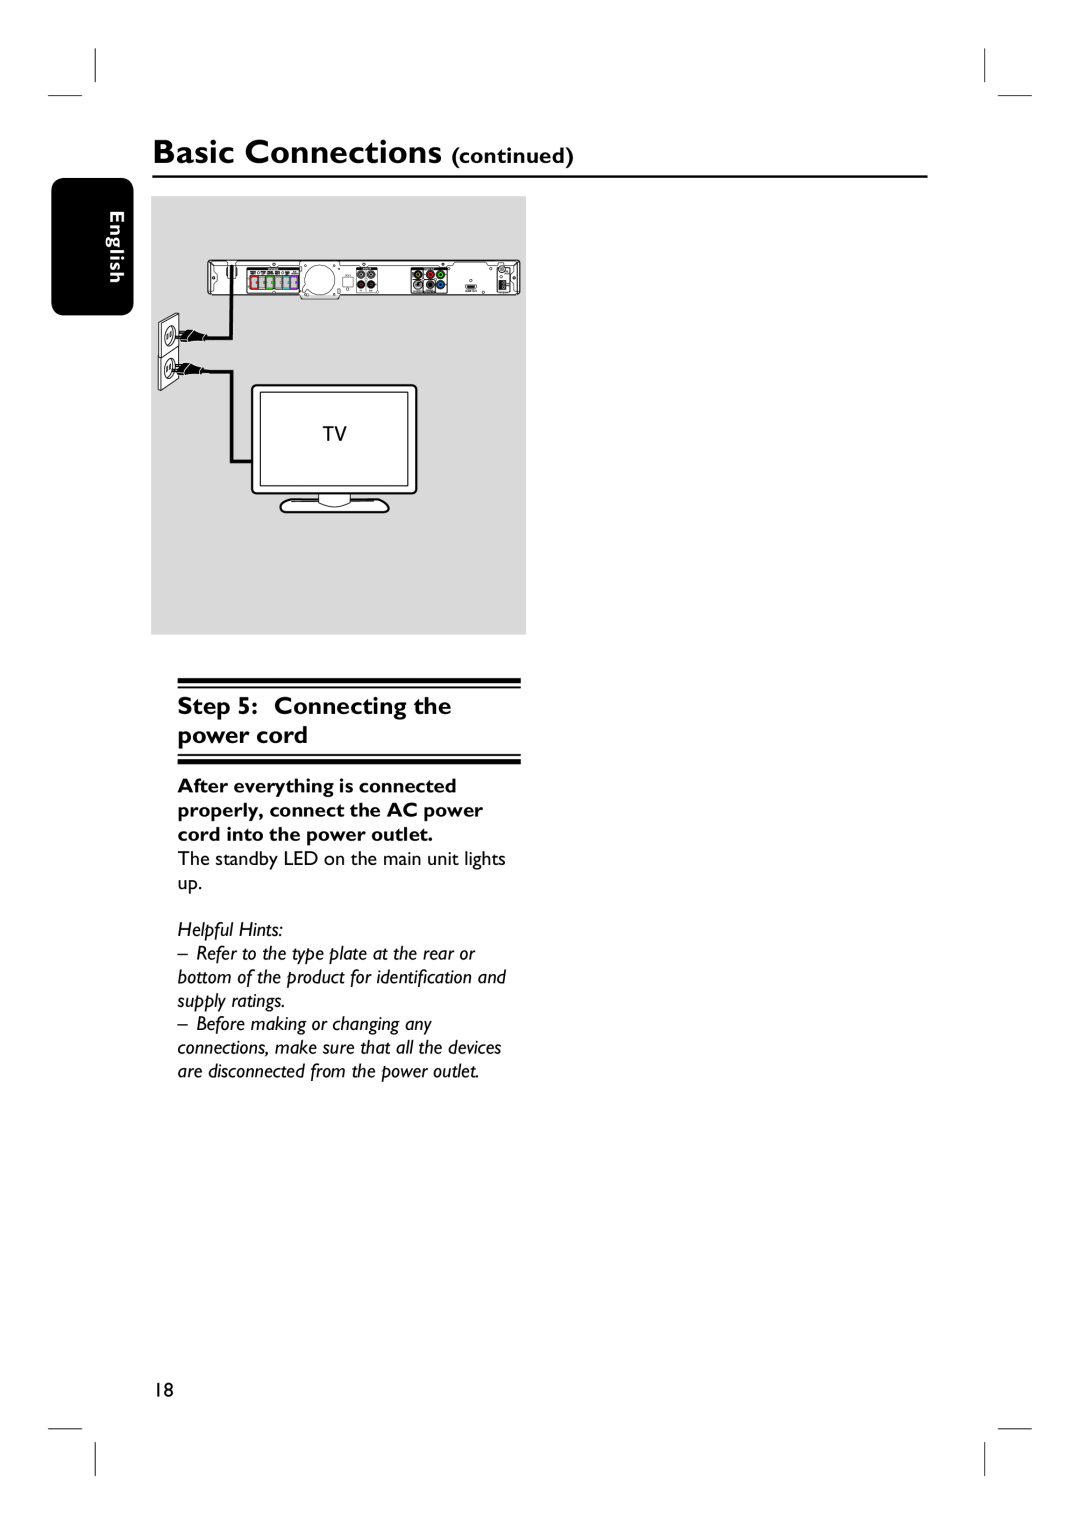 Philips HTS3555, HTS3544 user manual Connecting the power cord, Basic Connections continued, English, Helpful Hints 